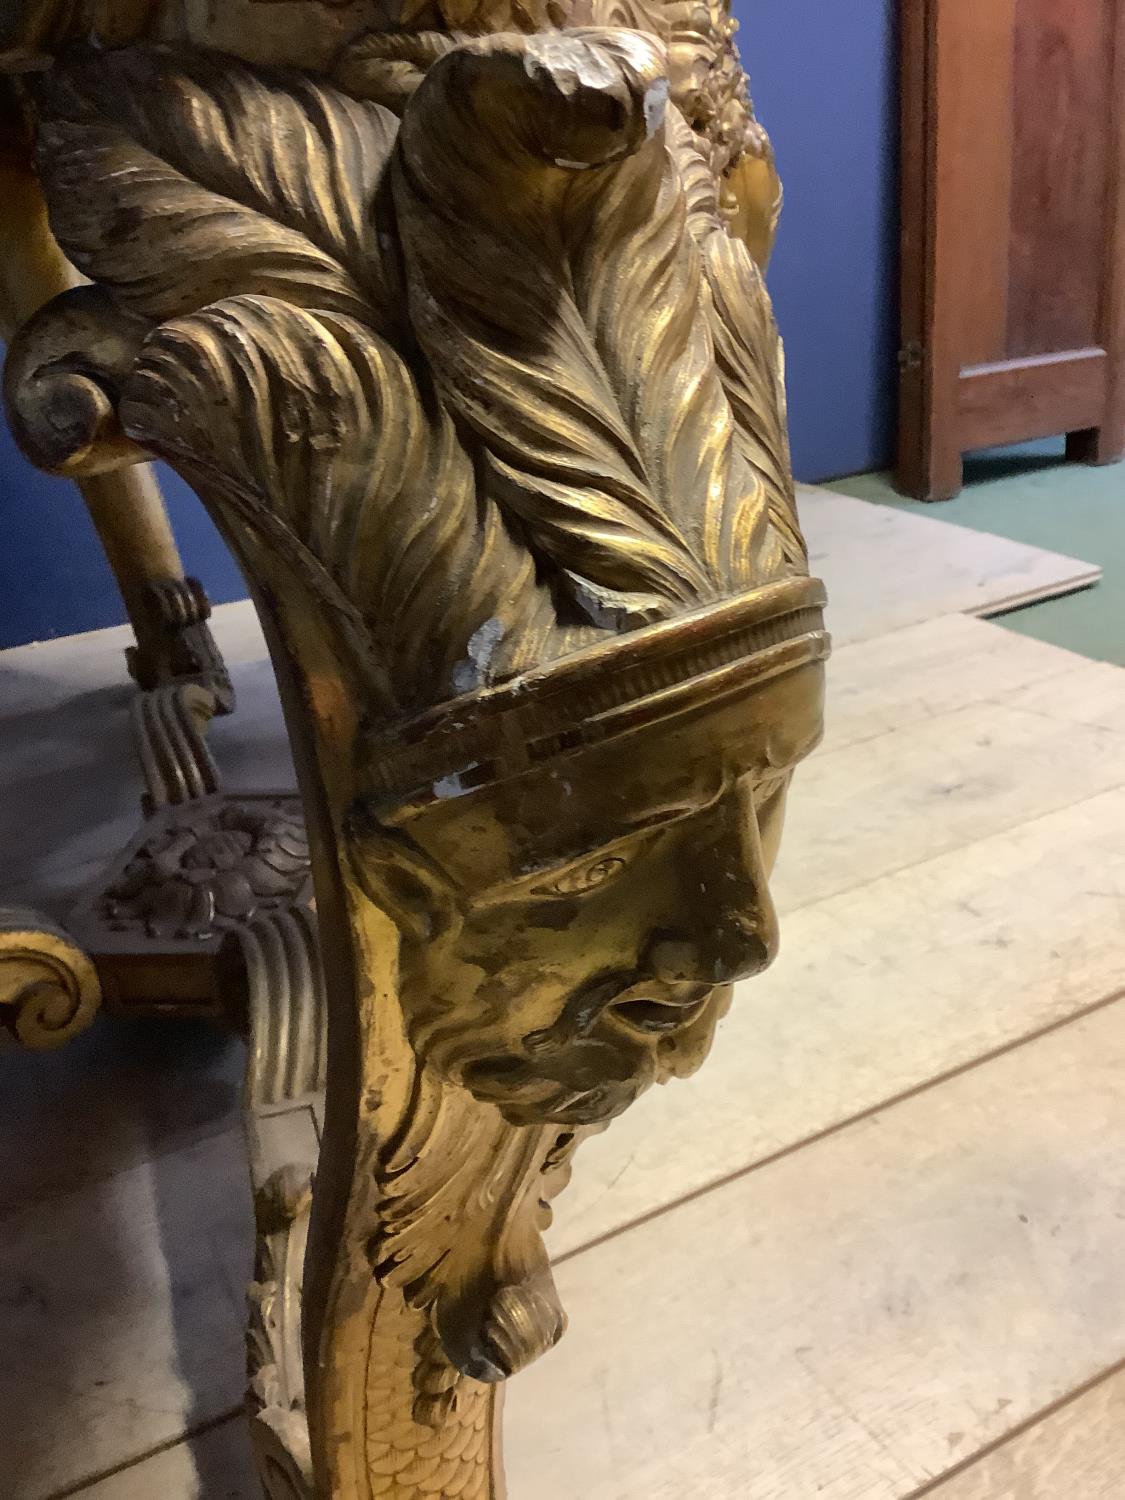 Early C18th/C19th giltwood side table in the manor of William Kent, elaborately carved & gilded unde - Image 10 of 12